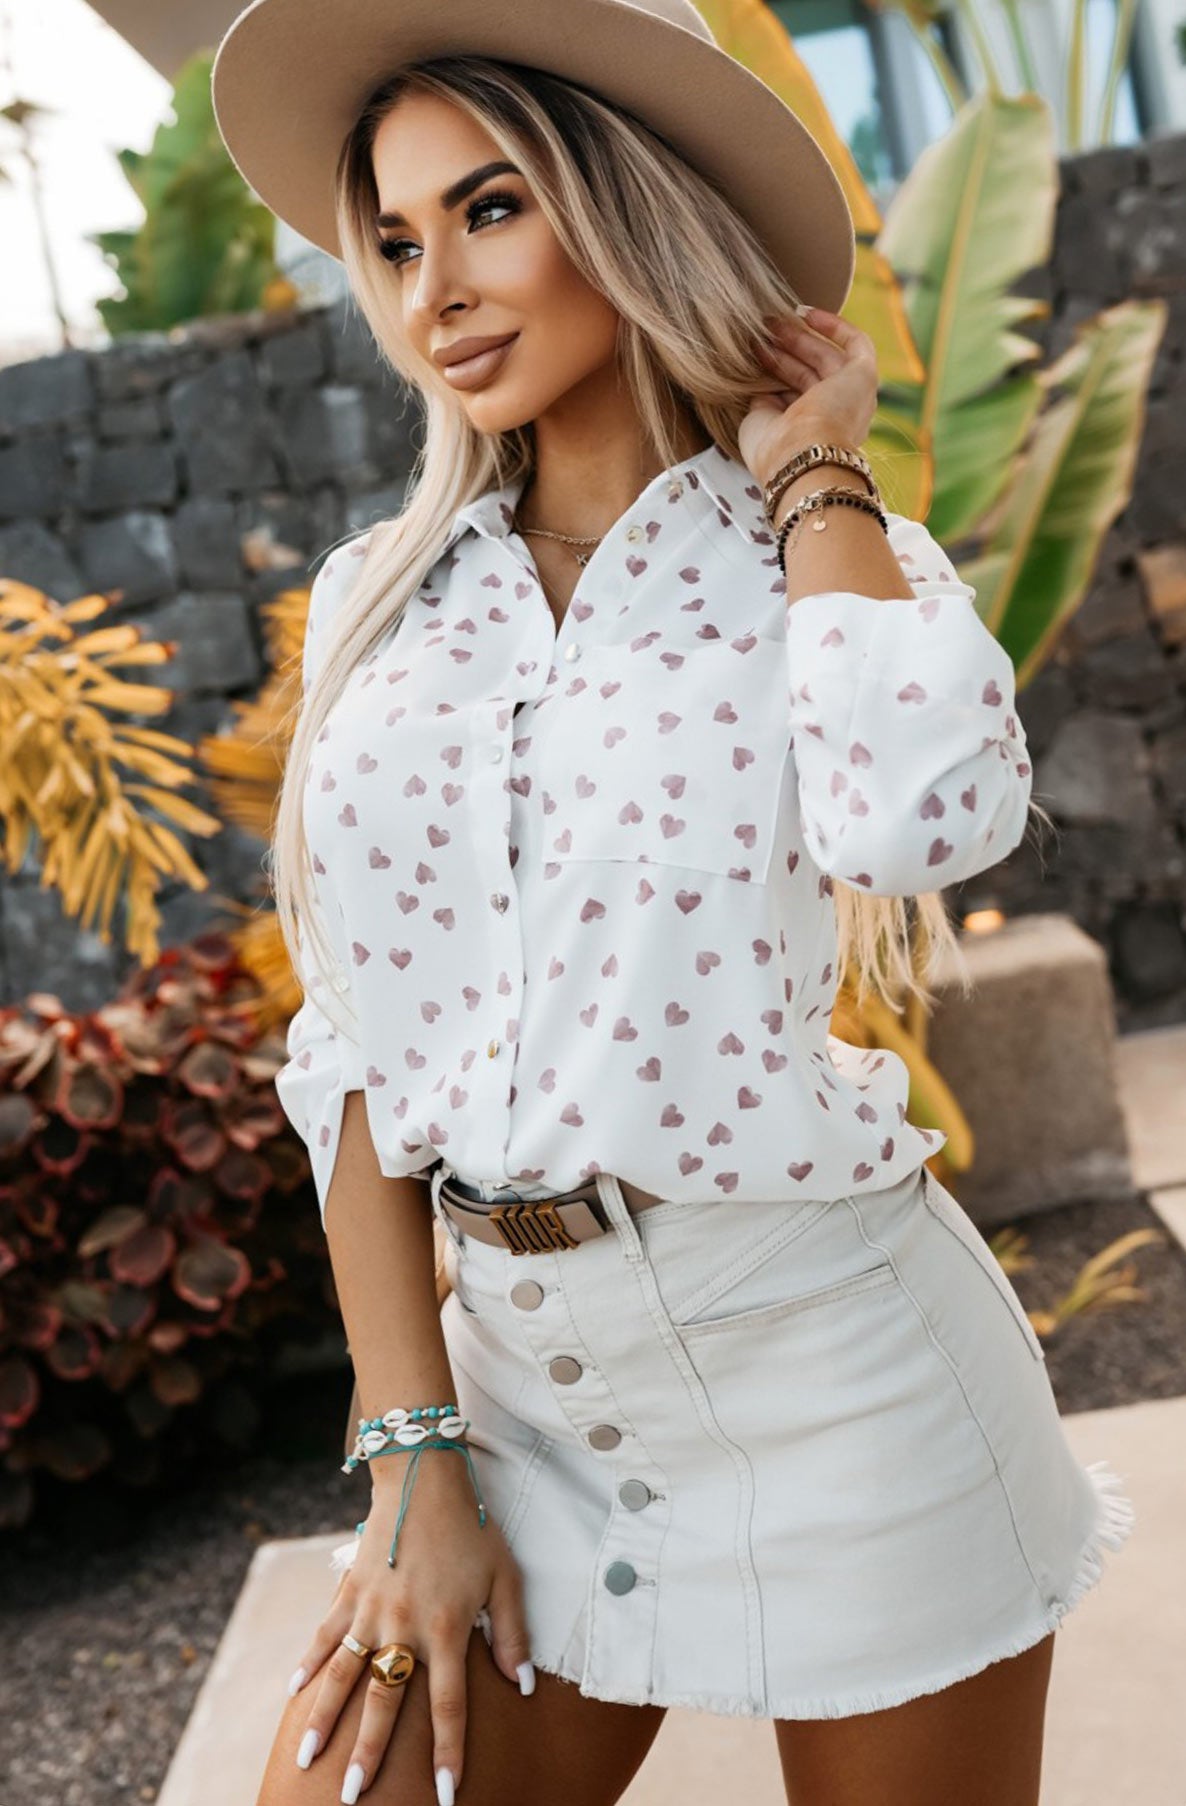 Violet Heart Printed Shirt Blouse Top-Ivory